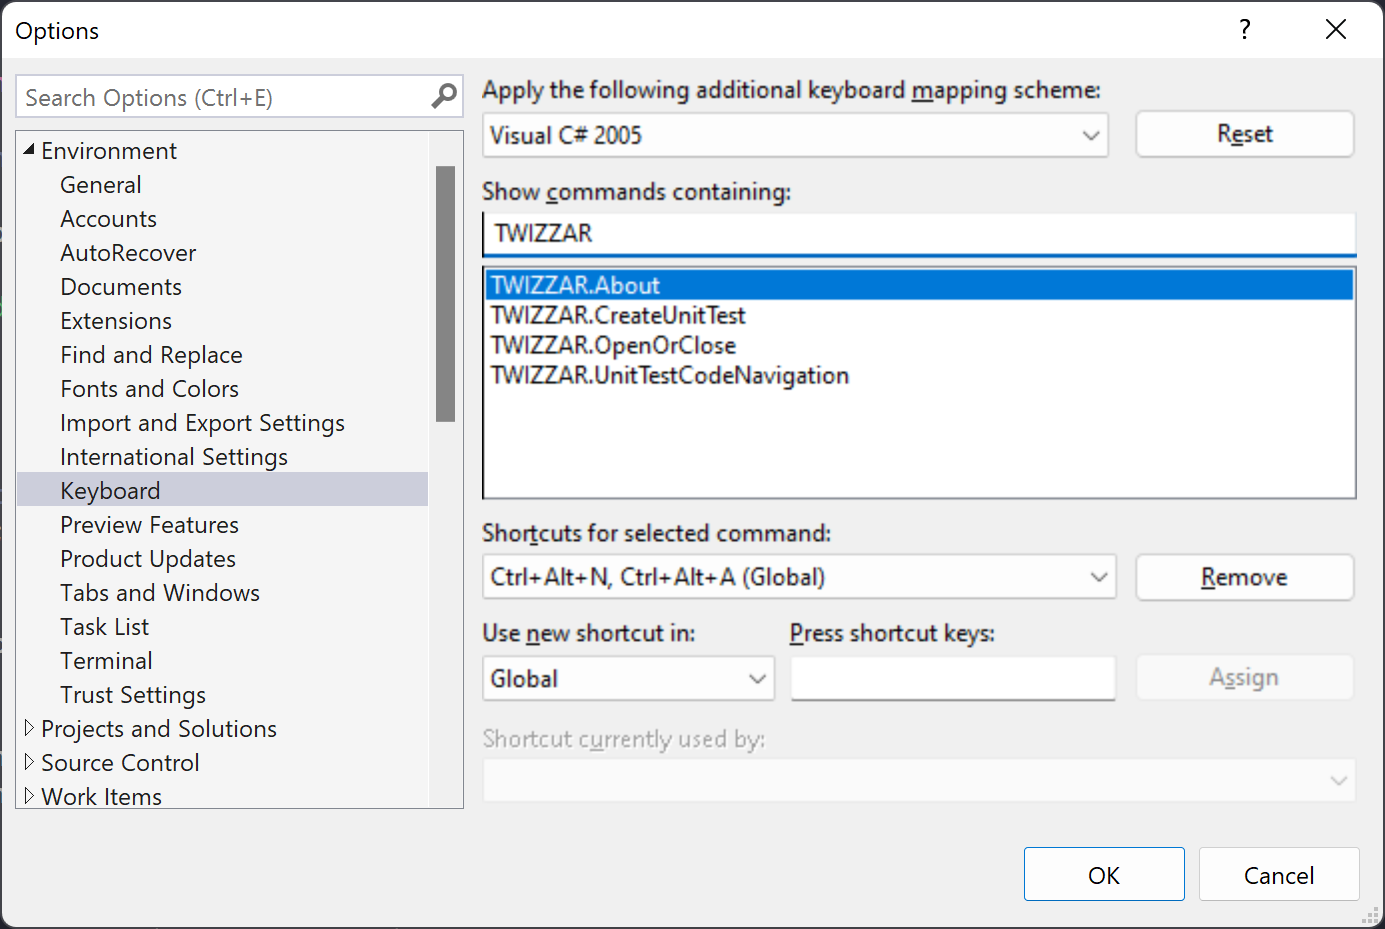 Open the options window of Visual Studio to set the TWIZZAR shortcuts.